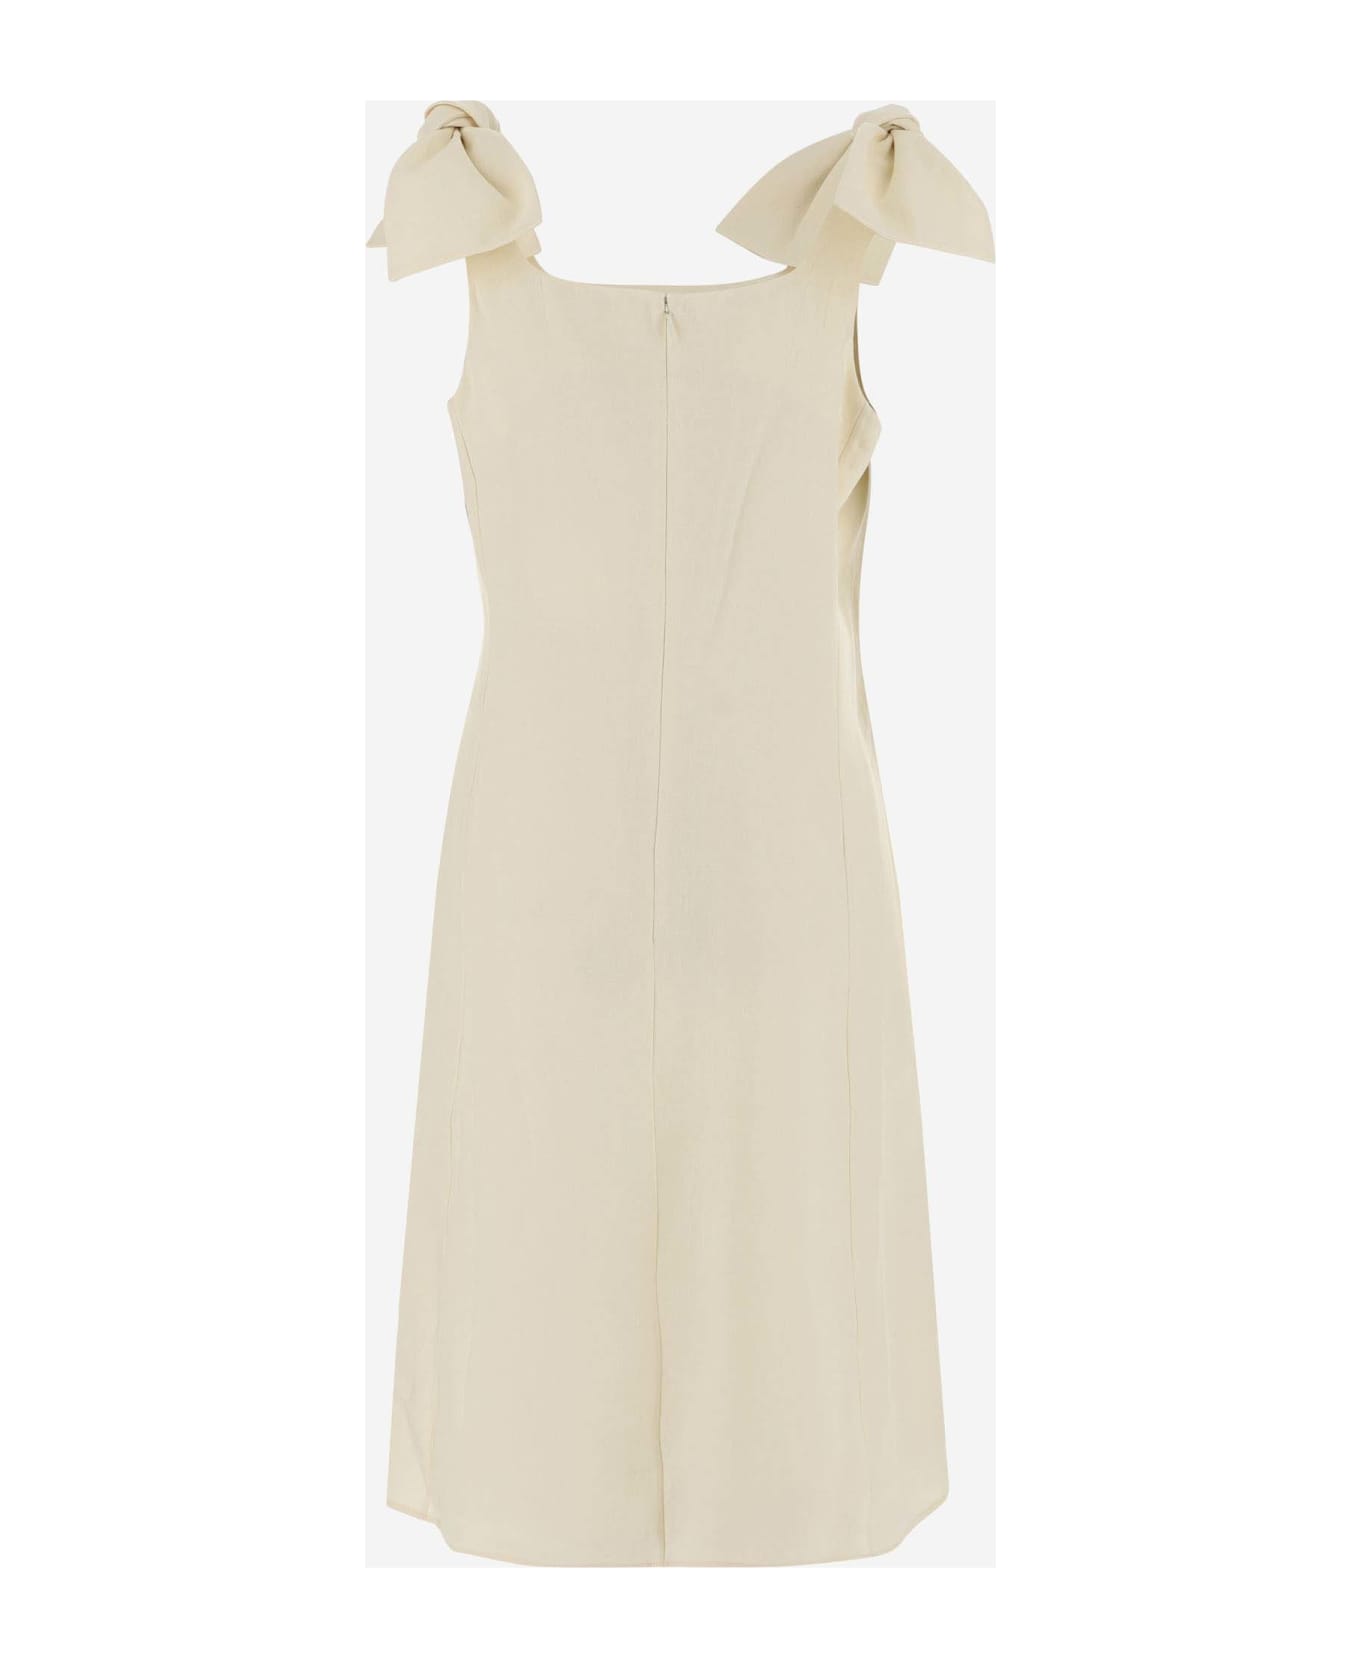 Chloé Linen Dress With Bows - Ivory